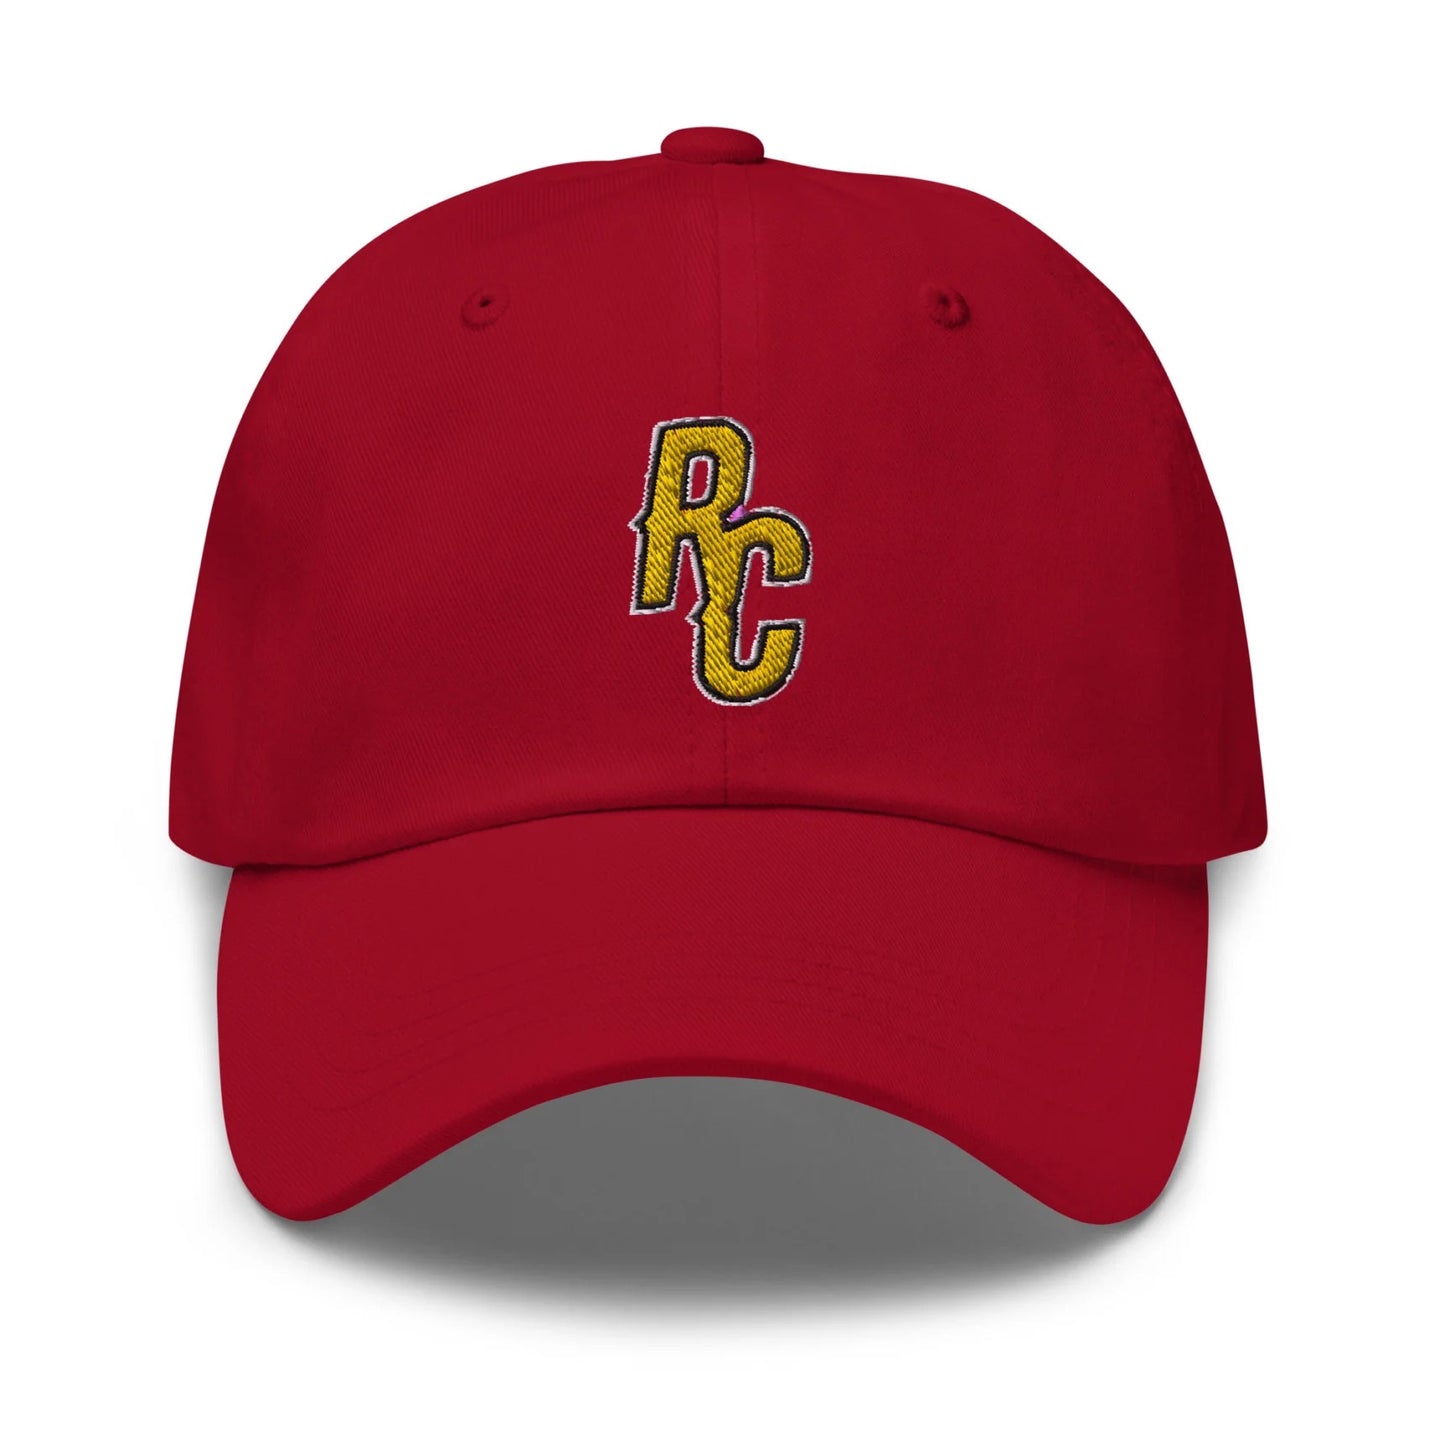 Ray Cheesy ShowZone baseball dad hat in red